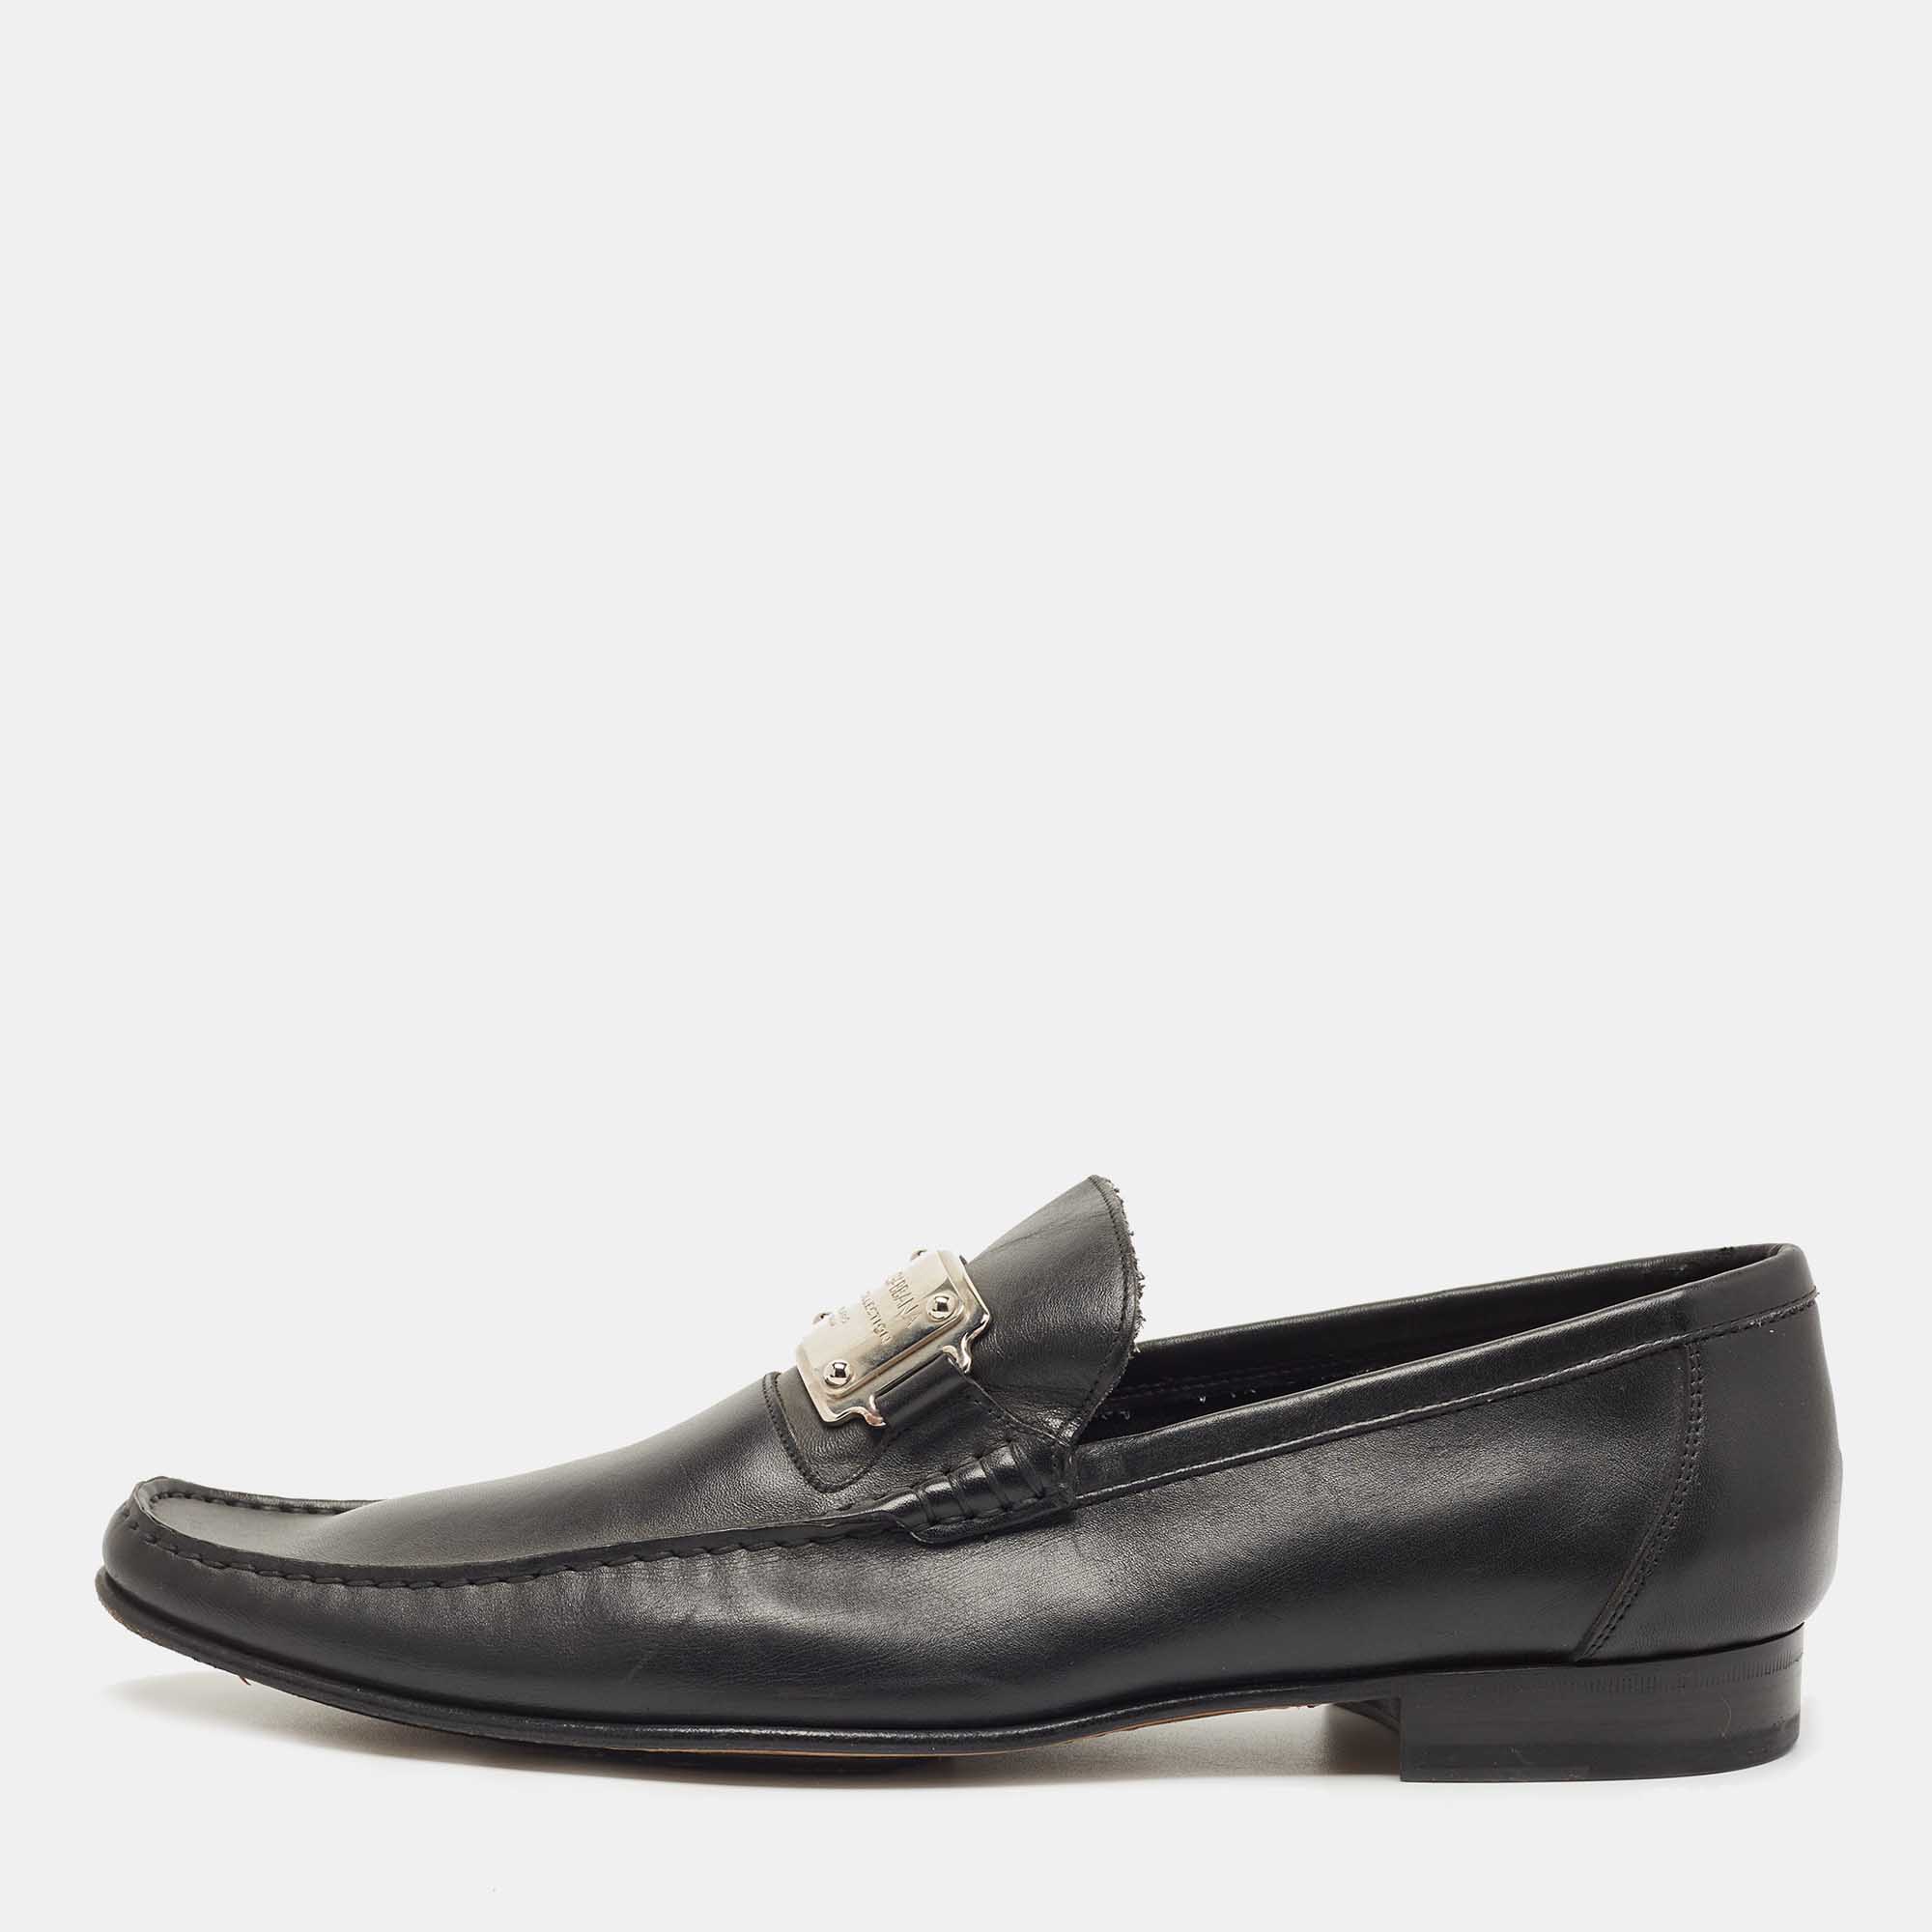 Pre-owned Dolce & Gabbana Black Leather Slip On Loafers Size 45